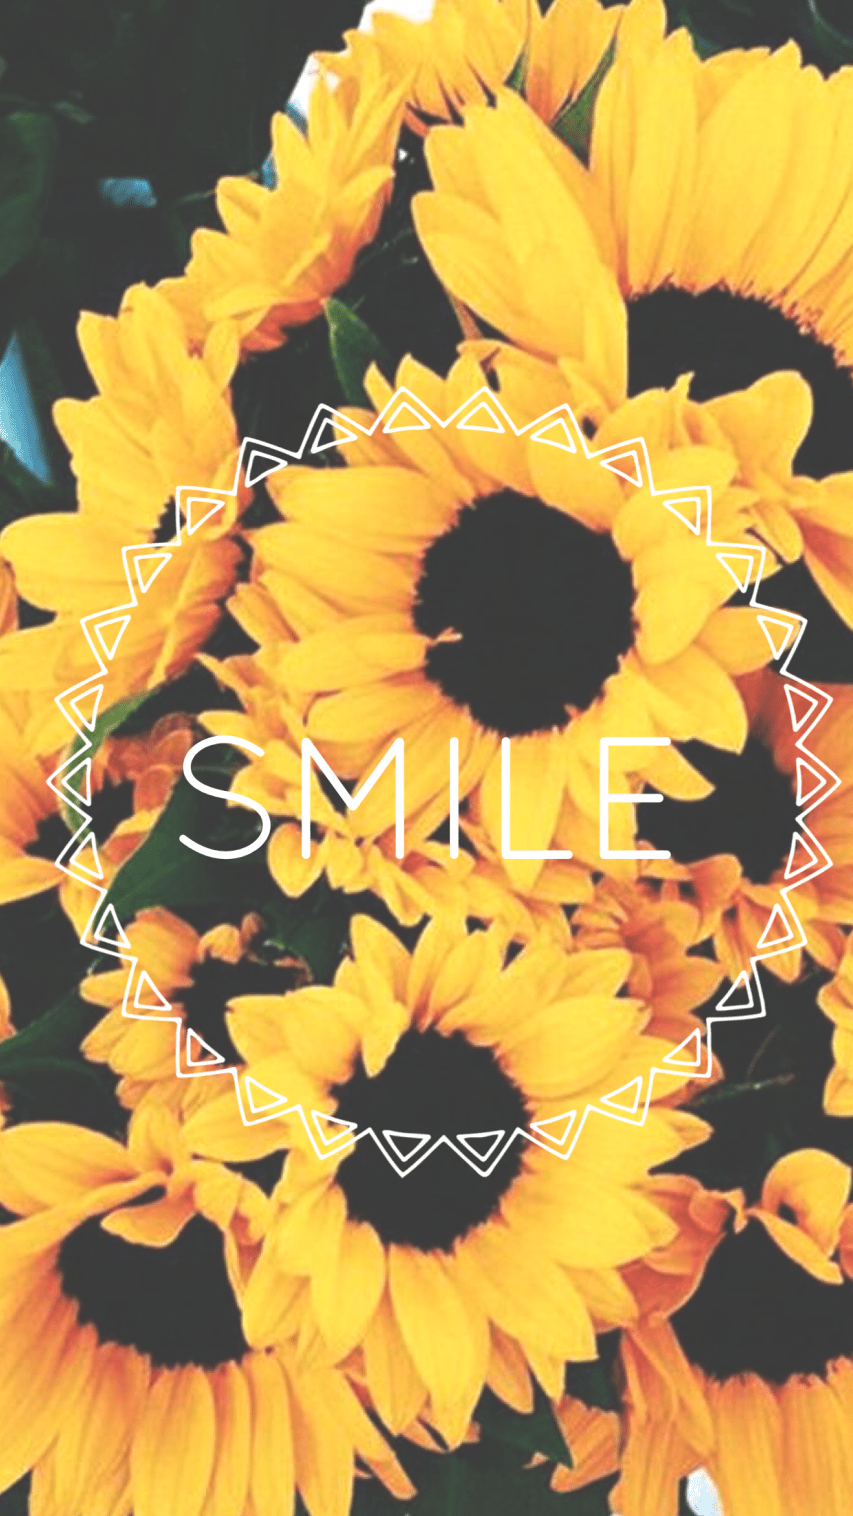 A yellow sunflower with the word smile in it - Sunflower, smile